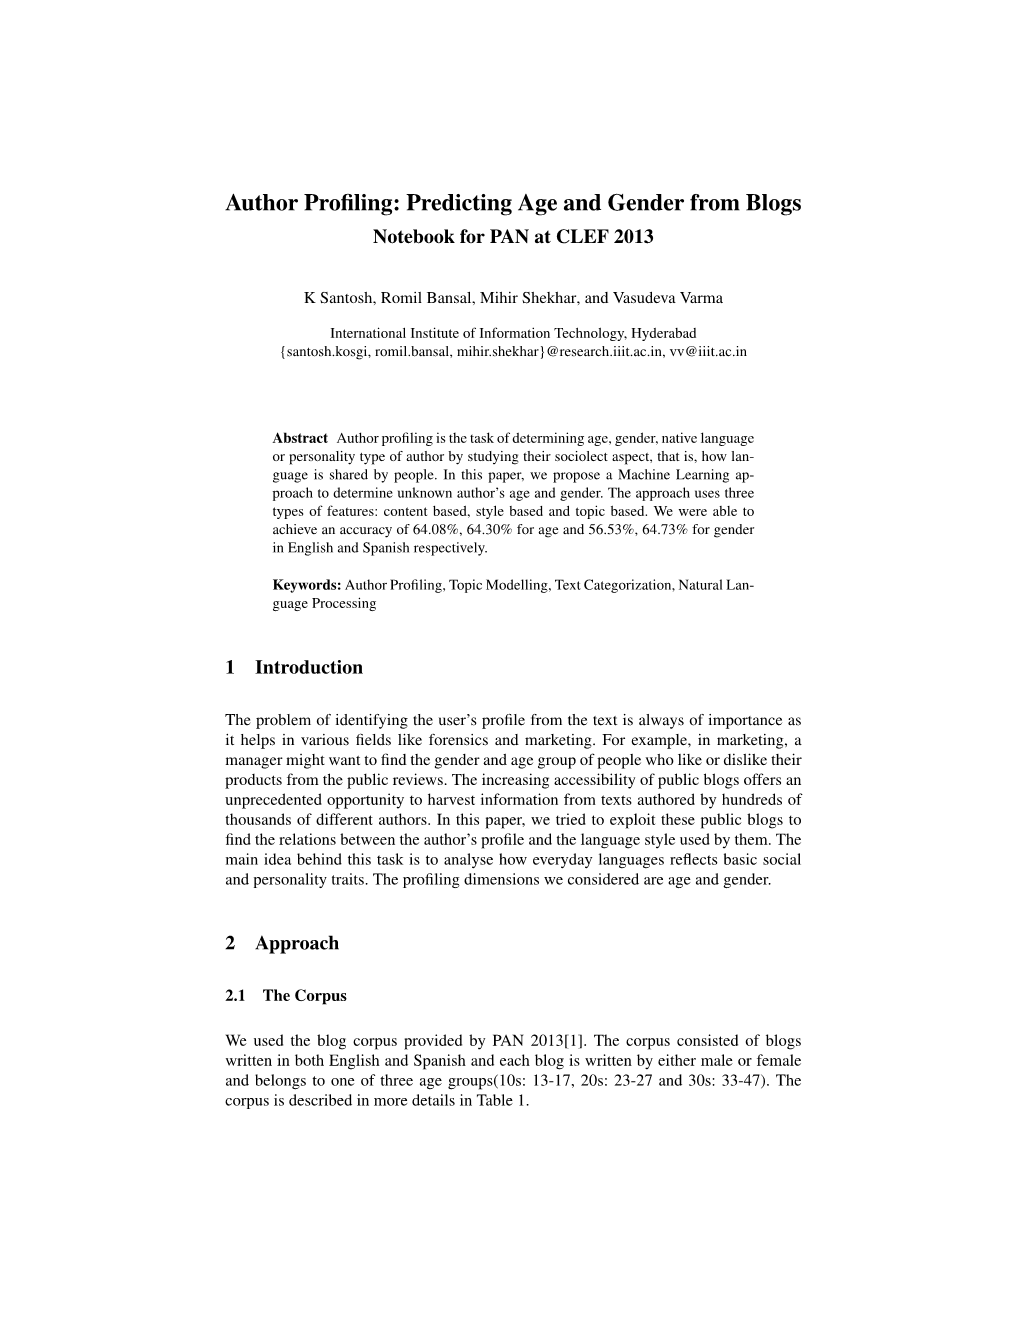 Author Profiling: Predicting Age and Gender from Blogs